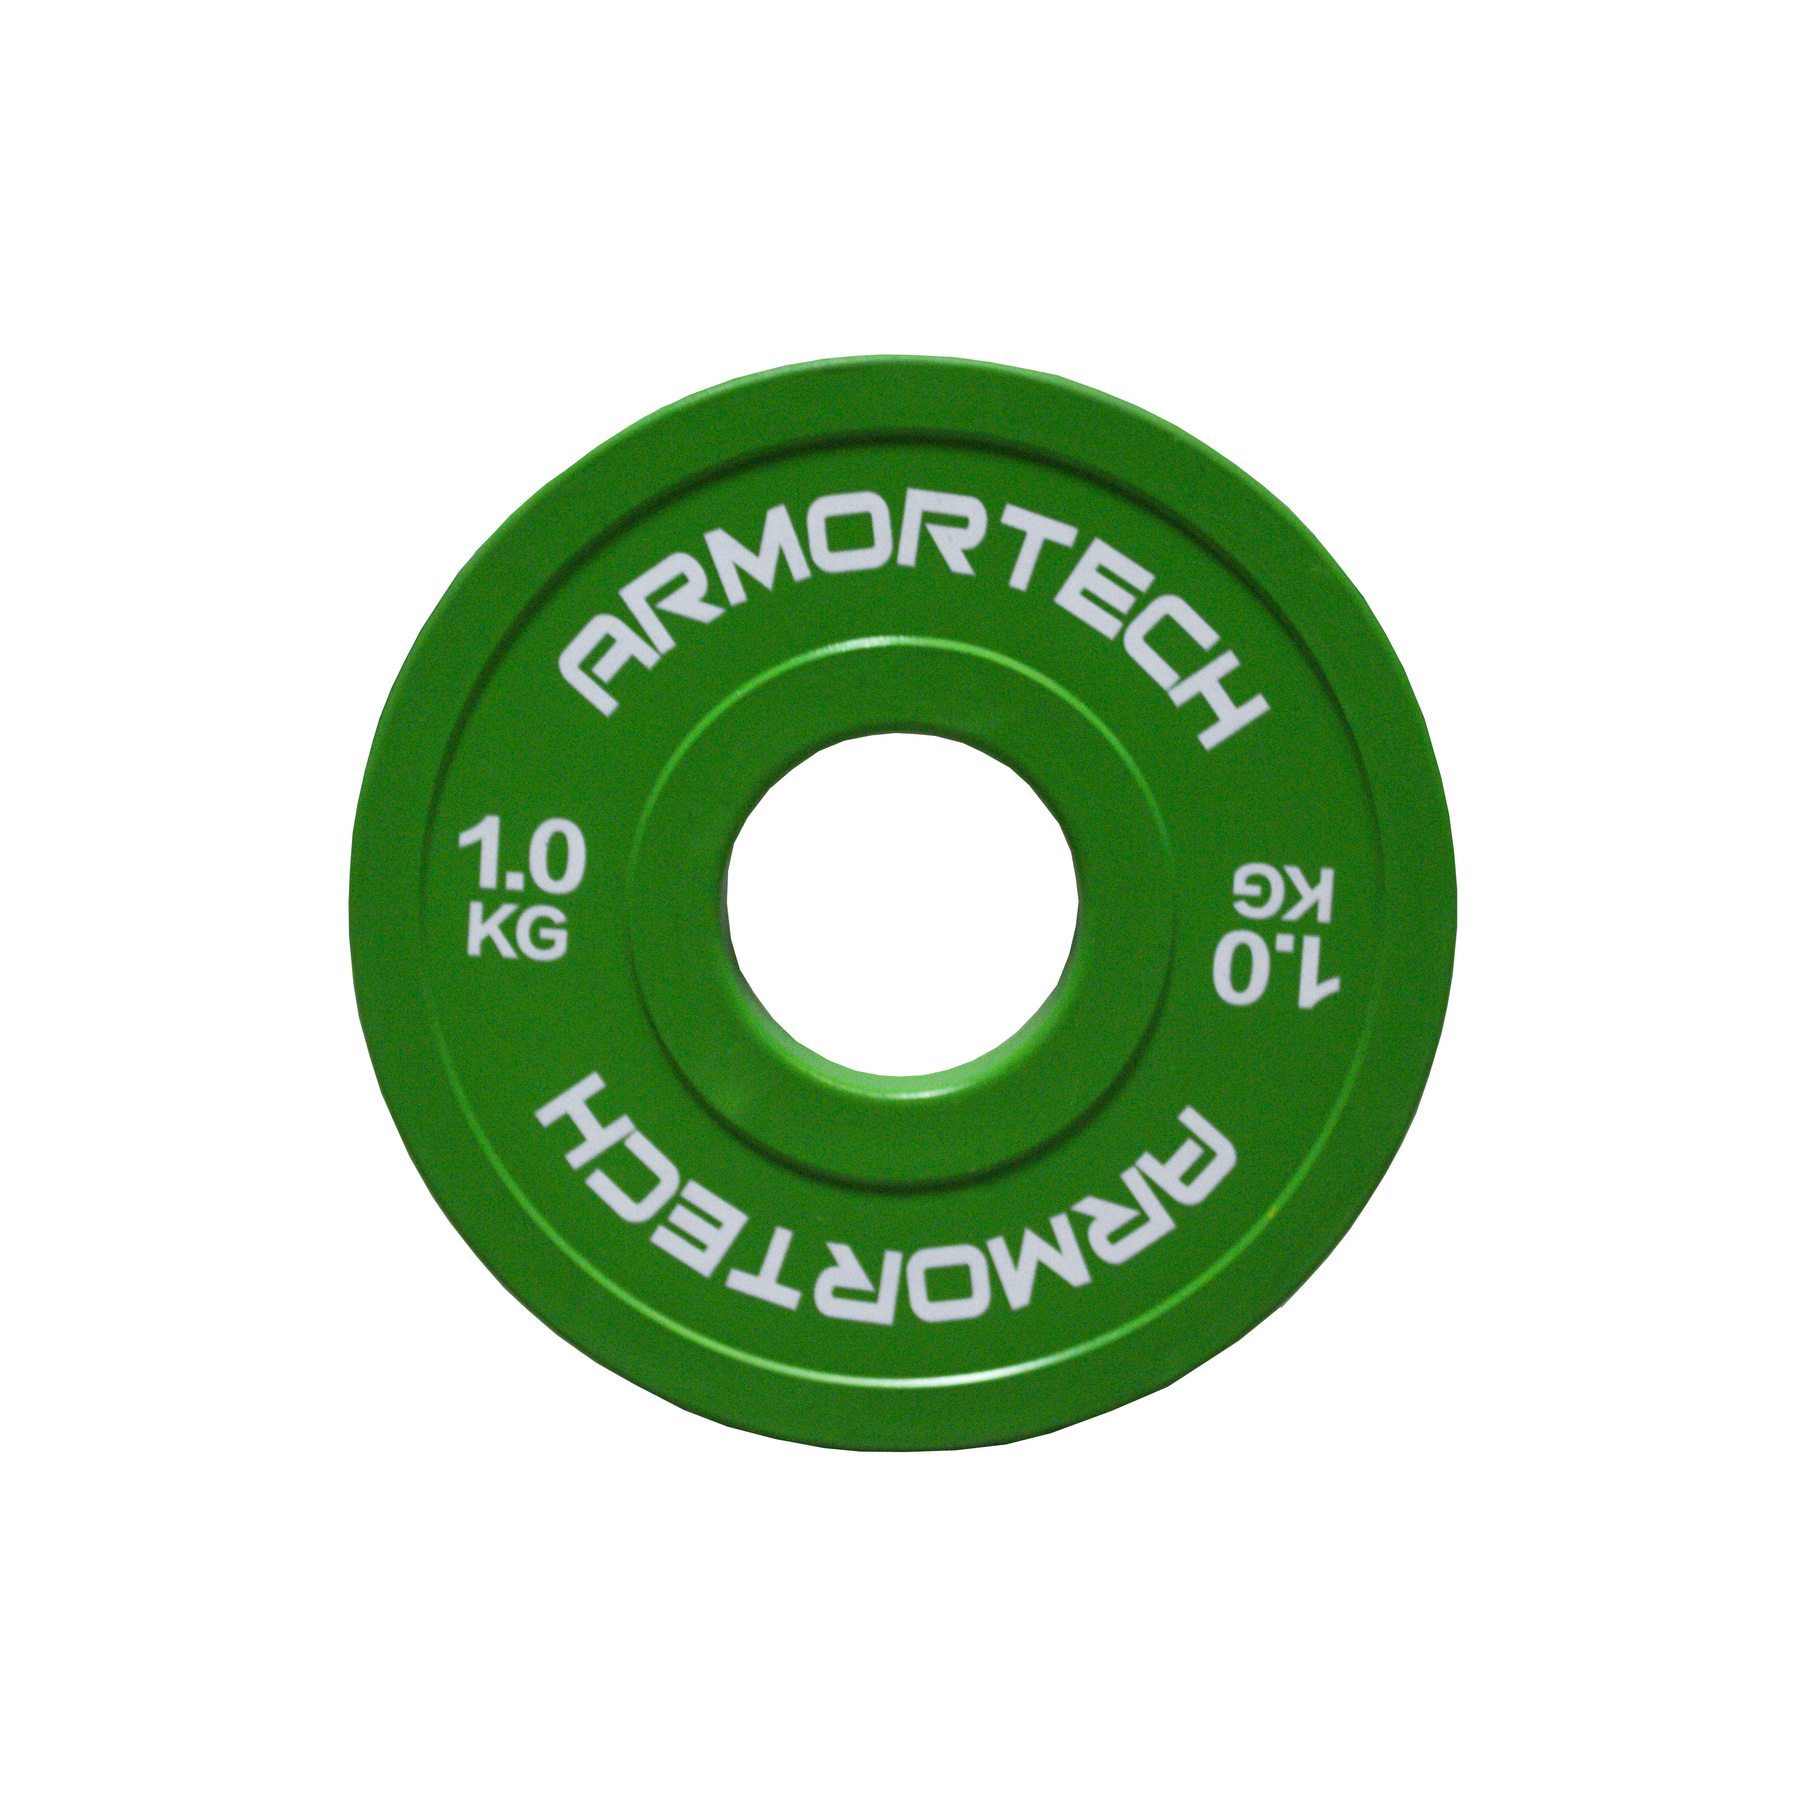 Armortech Rubber Fractional Plate Single [Colour: White] [WEIGHT: 5KG]